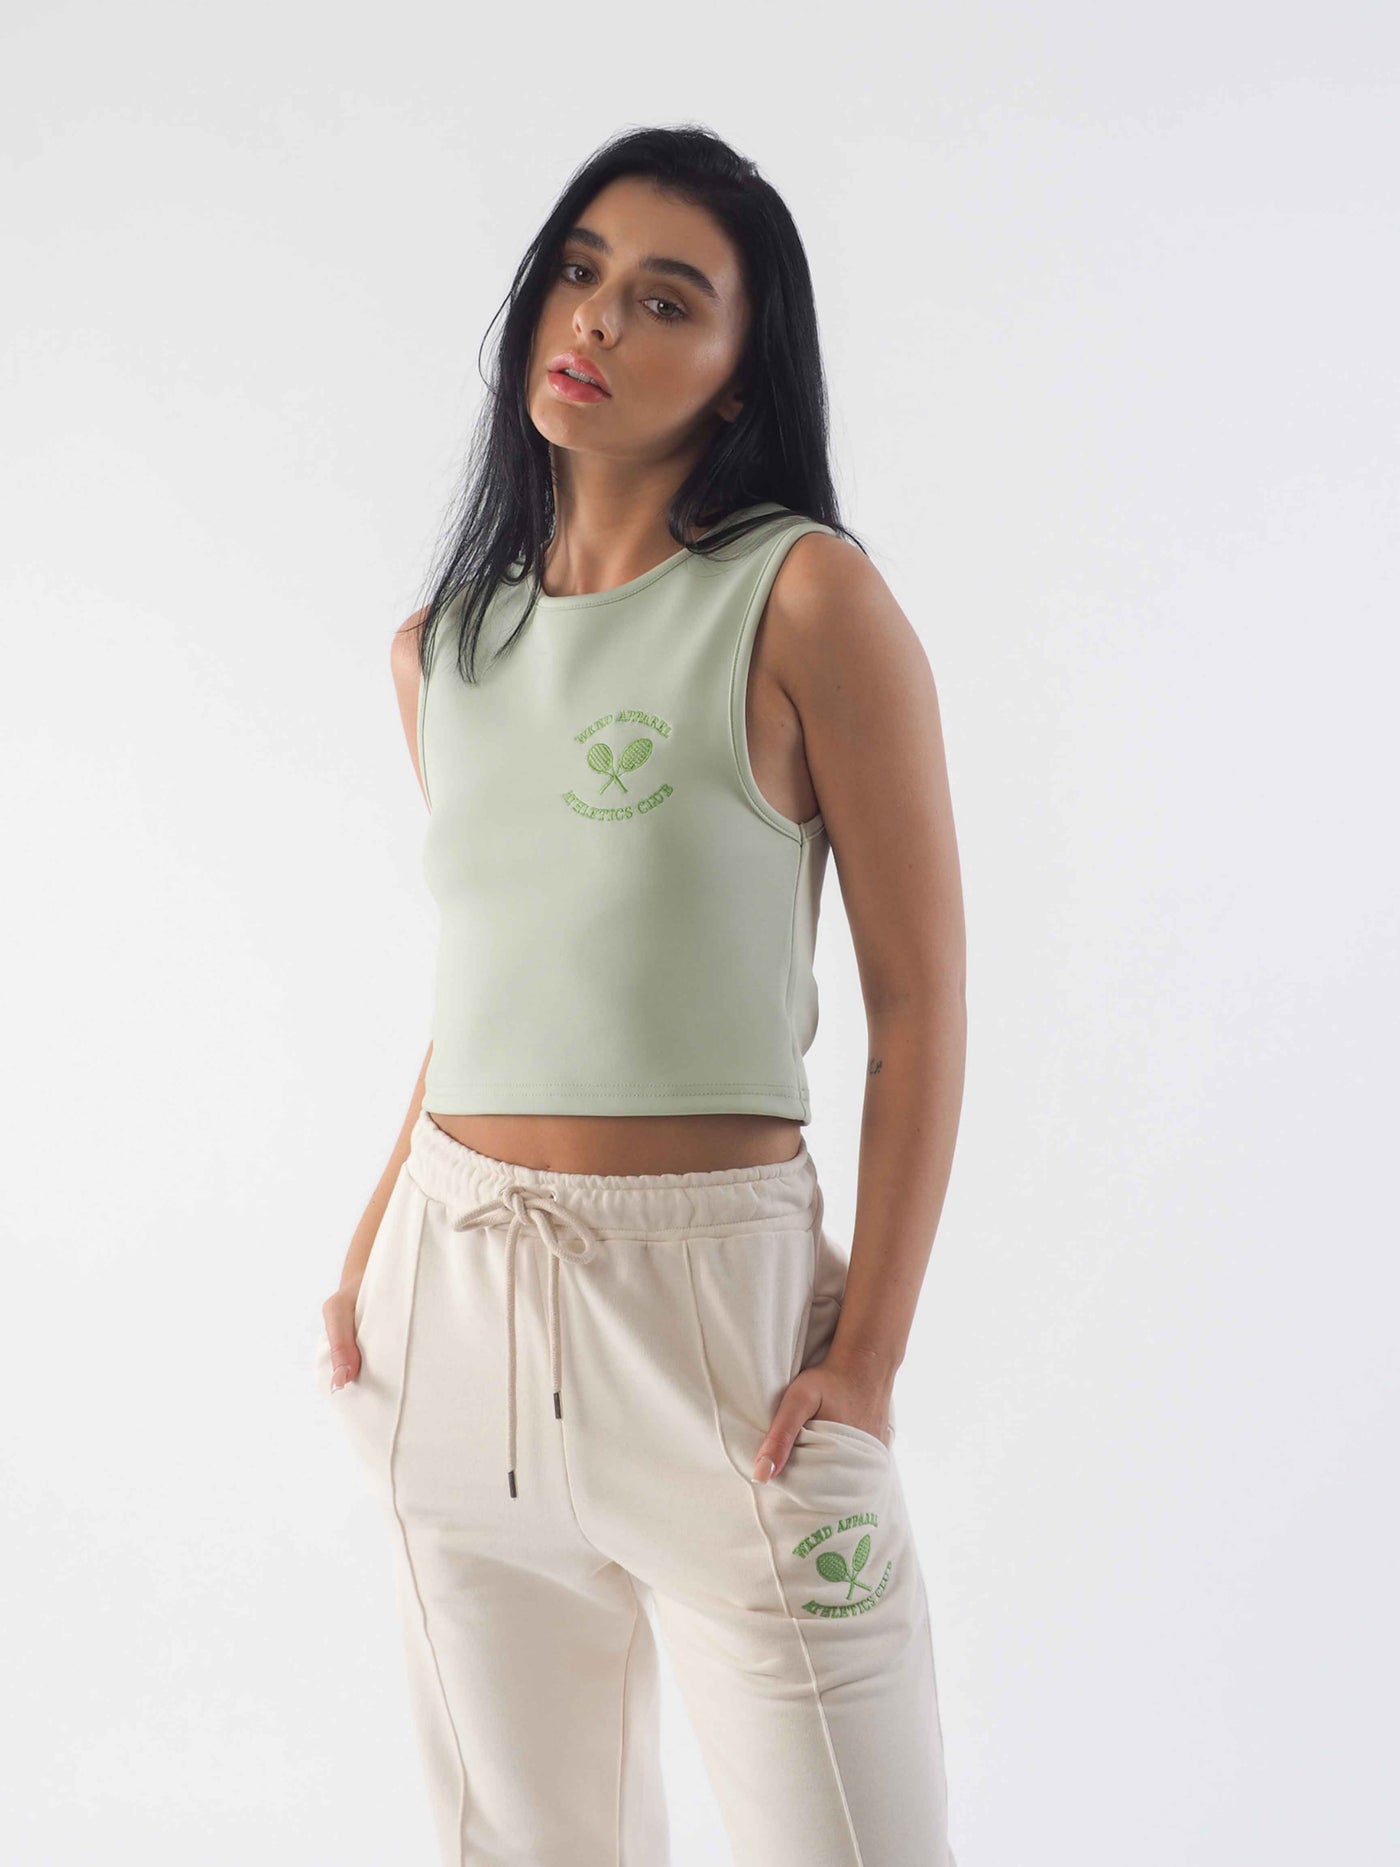 Model with dark hair wearing the jade green vest and eggnog joggers.